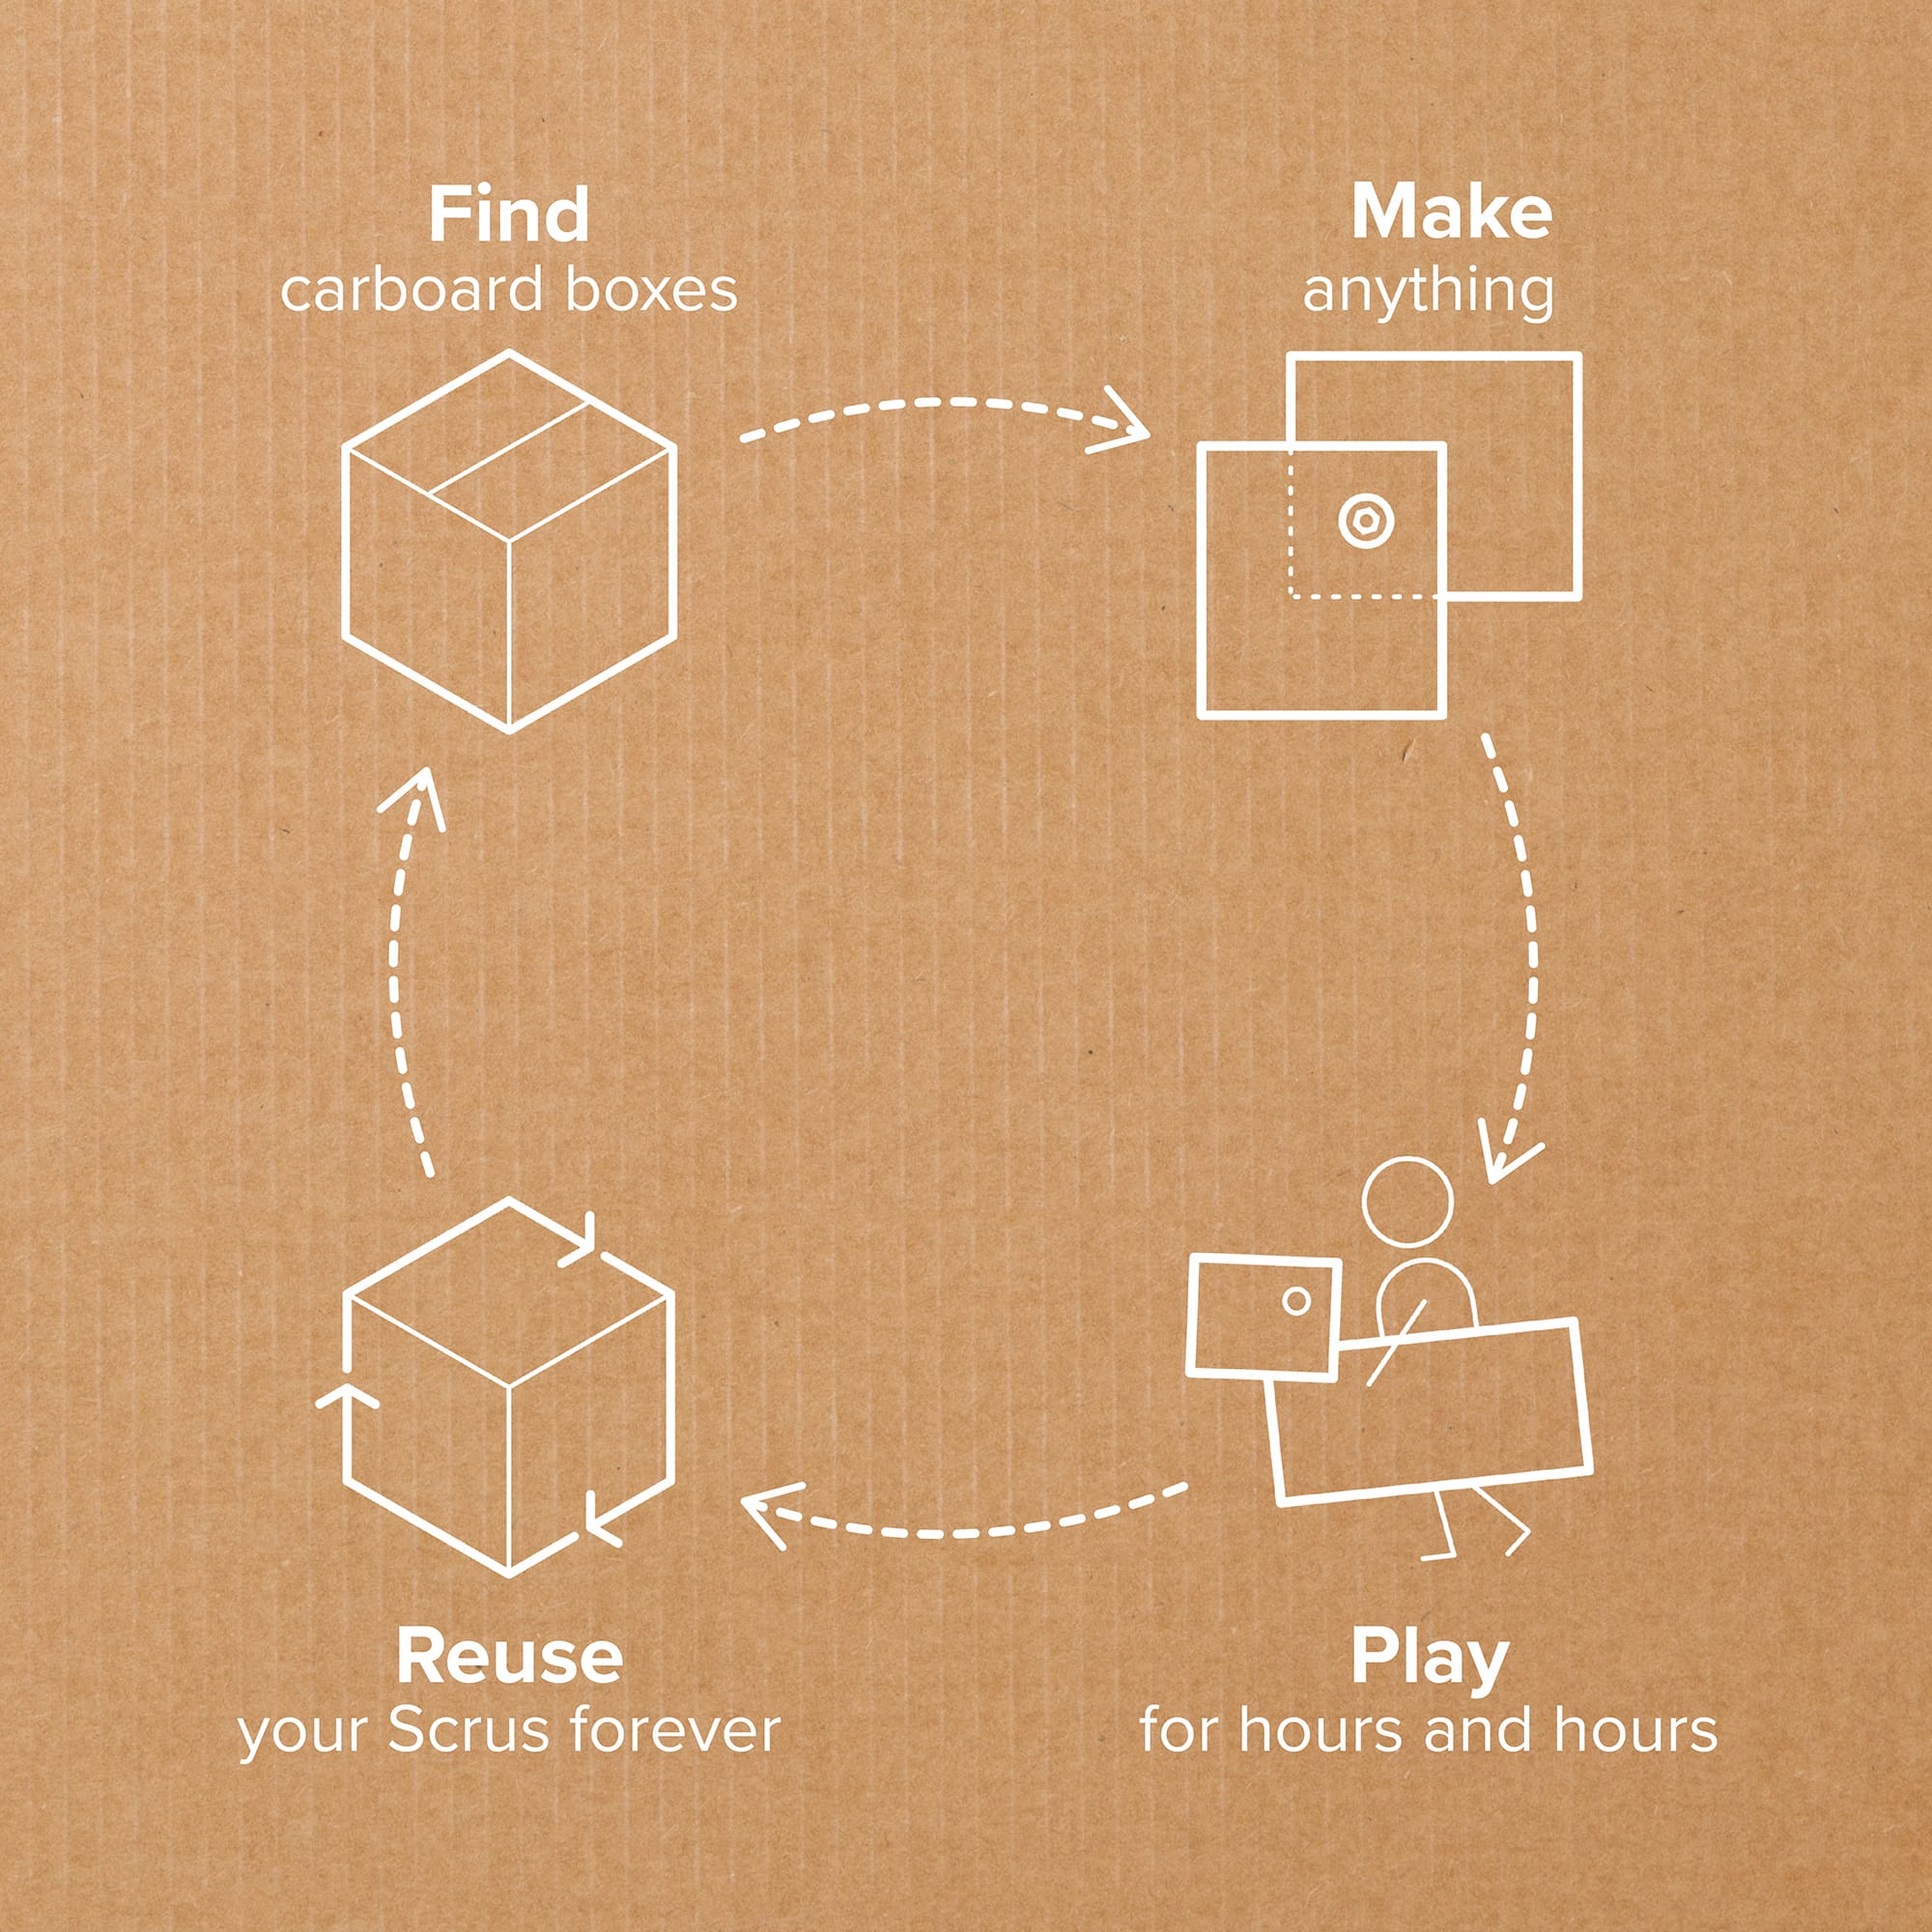 Makedo on X: Here is a fun idea for first-time makers - create 2D